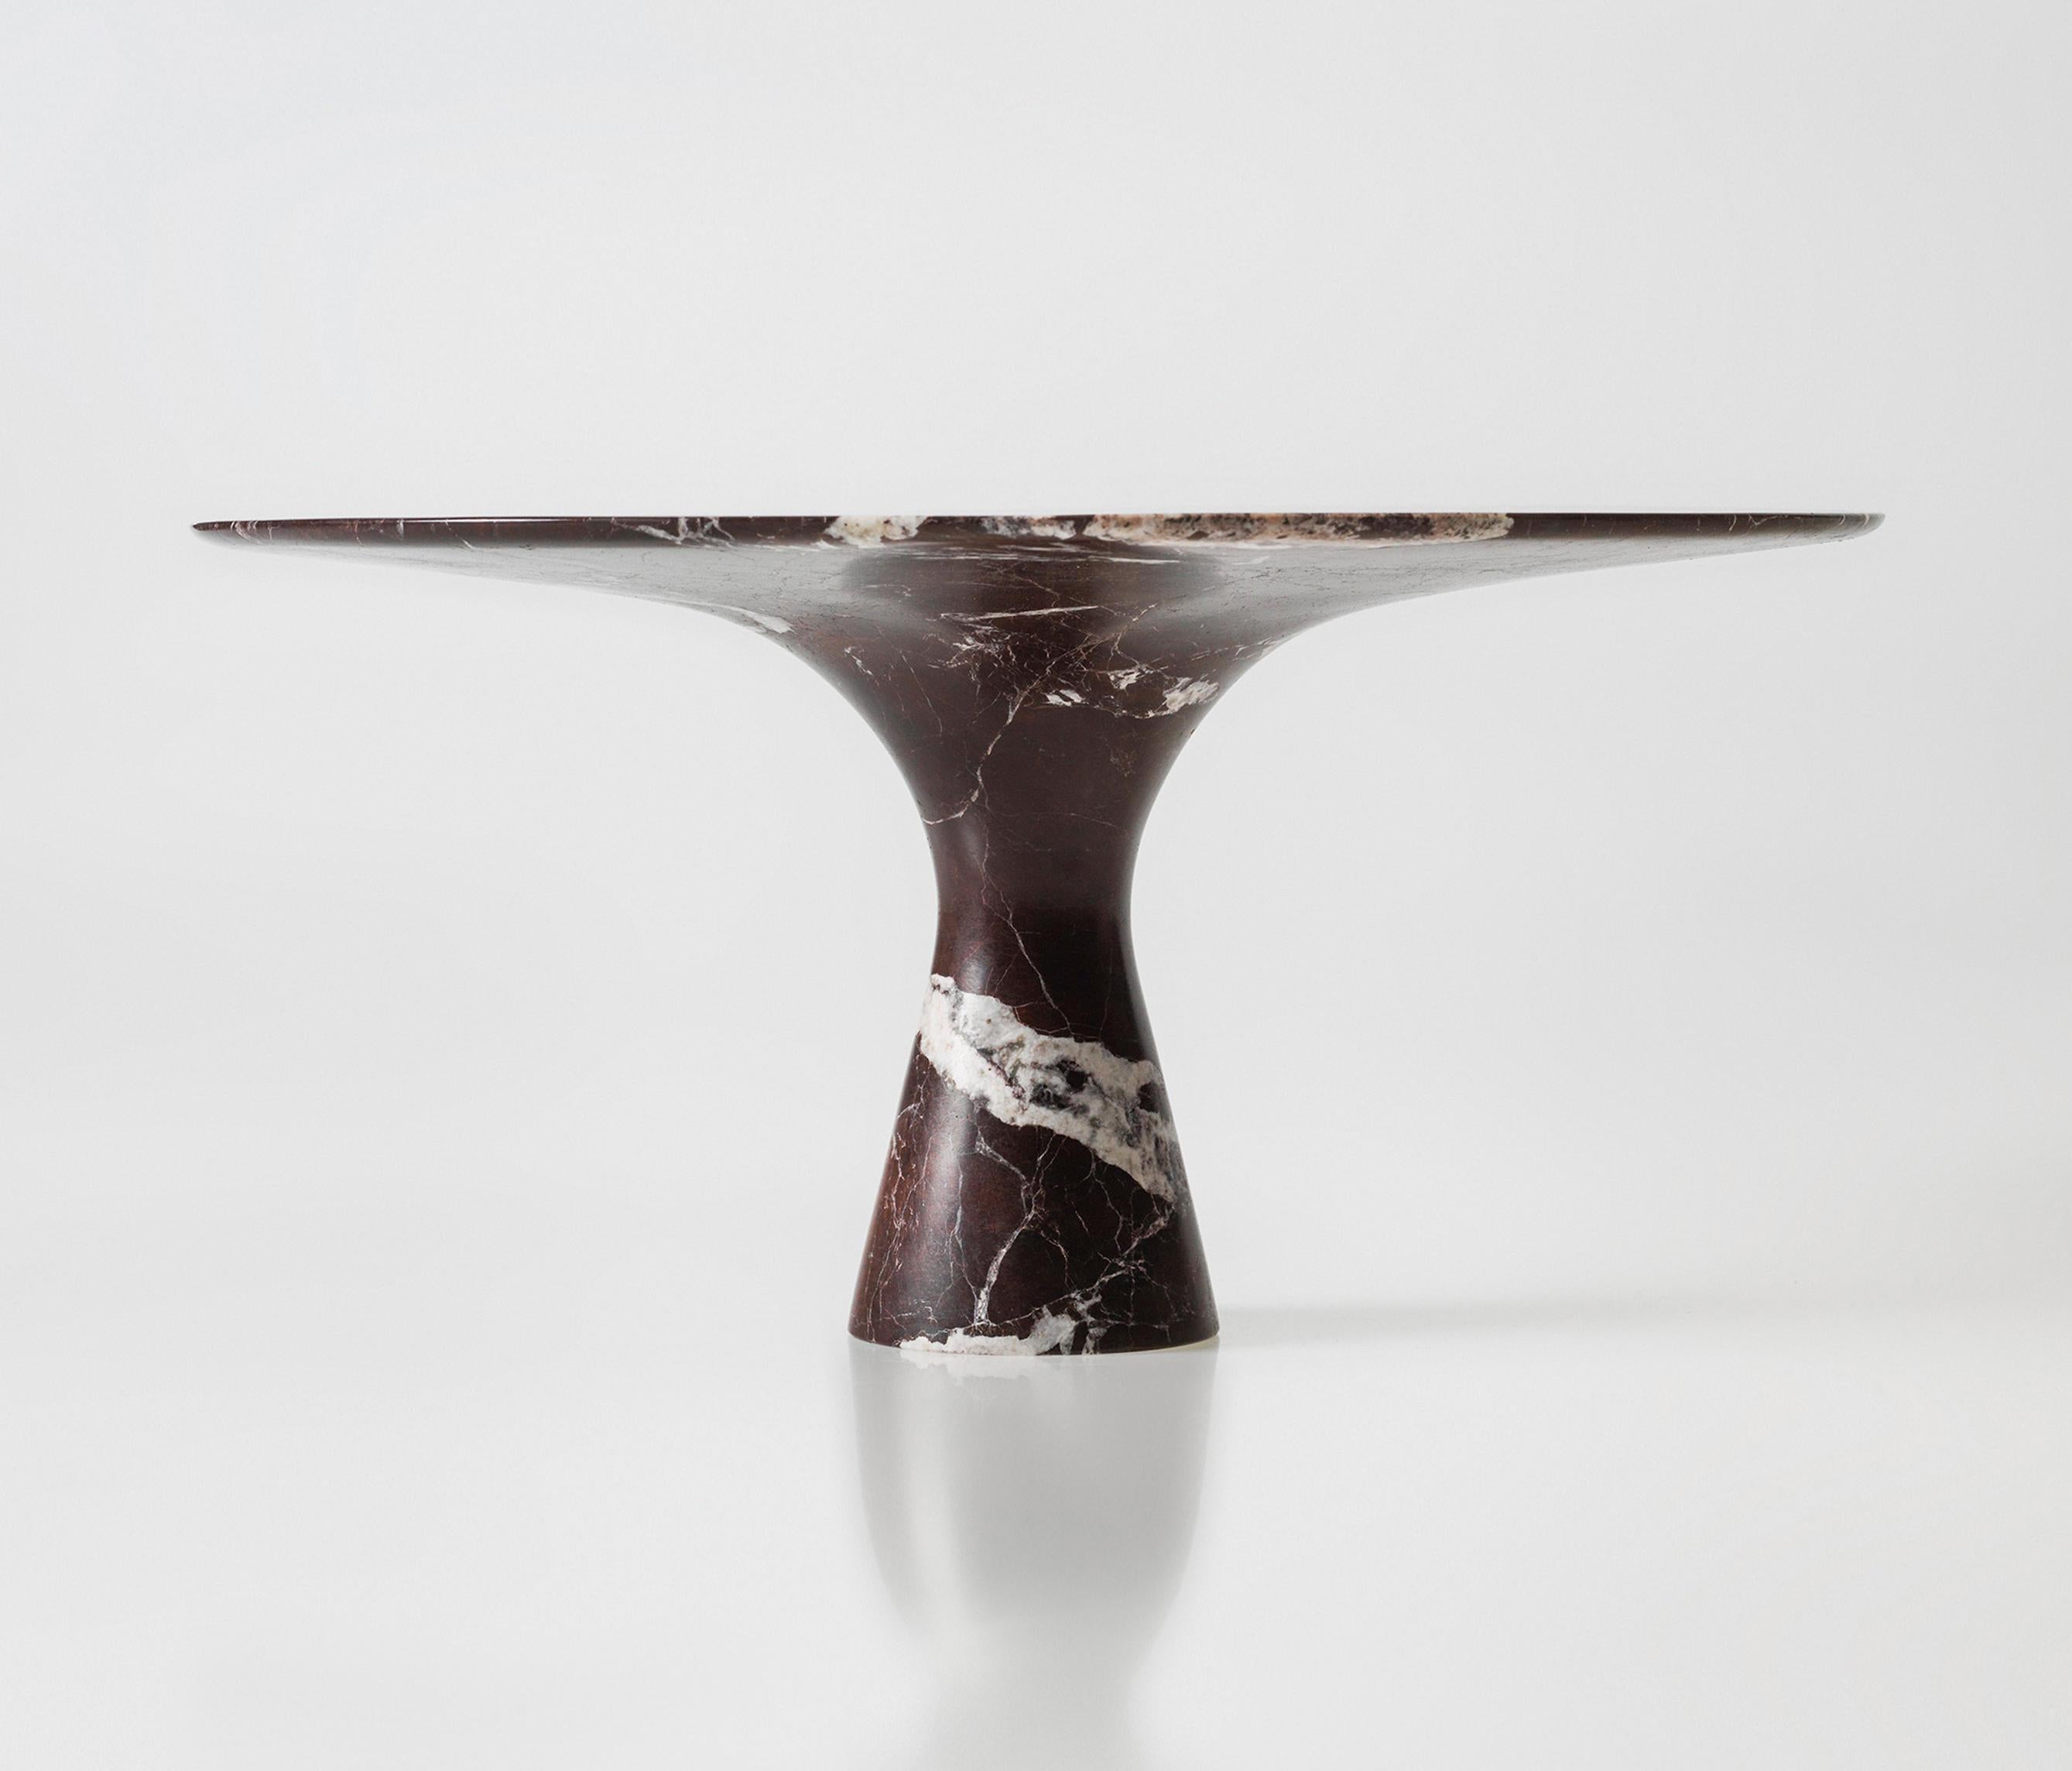 Rosso Lepanto Refined Contemporary Marble Dining Table 180/75
Dimensions: 180 x 75 cm
Materials: Rosso Lepanto

Angelo is the essence of a round table in natural stone, a sculptural shape in robust material with elegant lines and refined